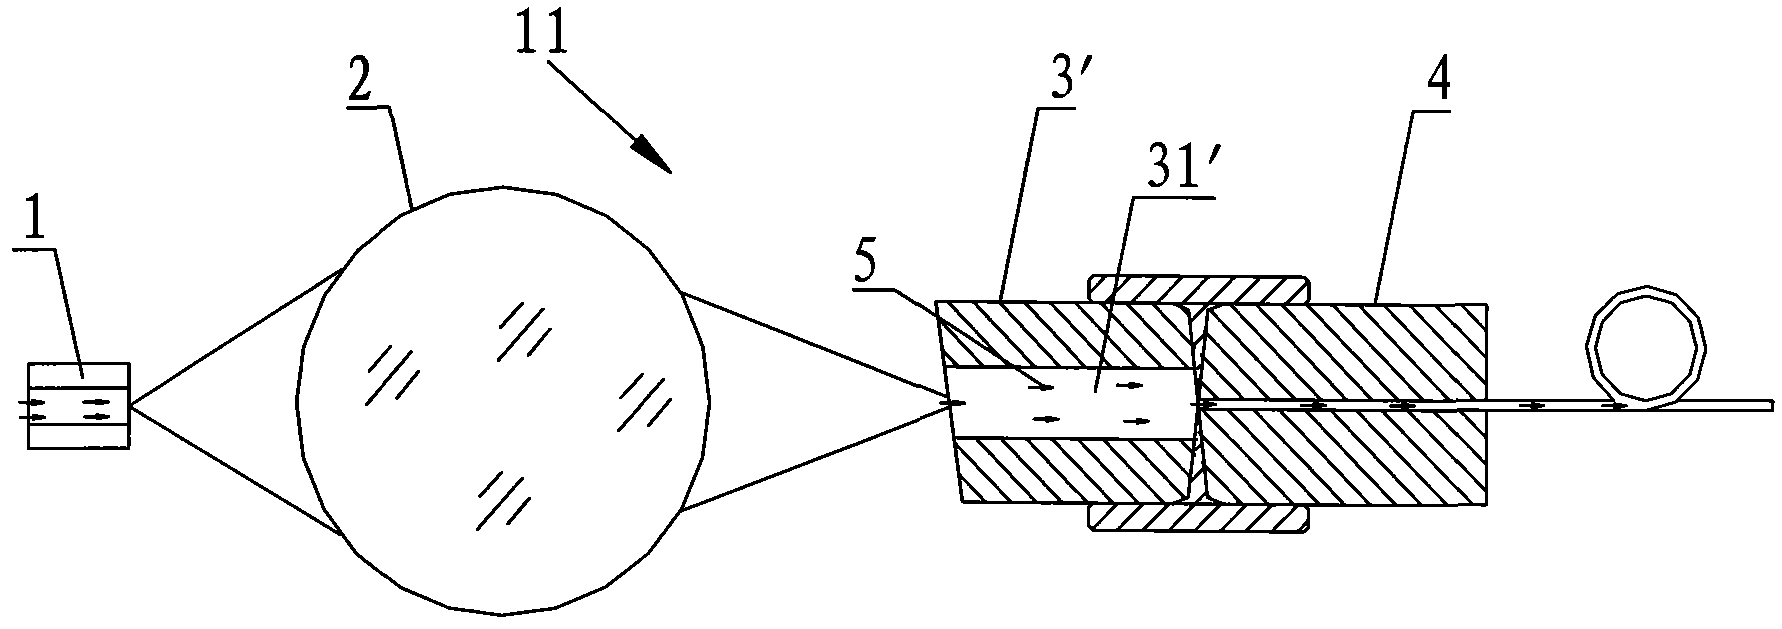 Spot coupling and conversion device